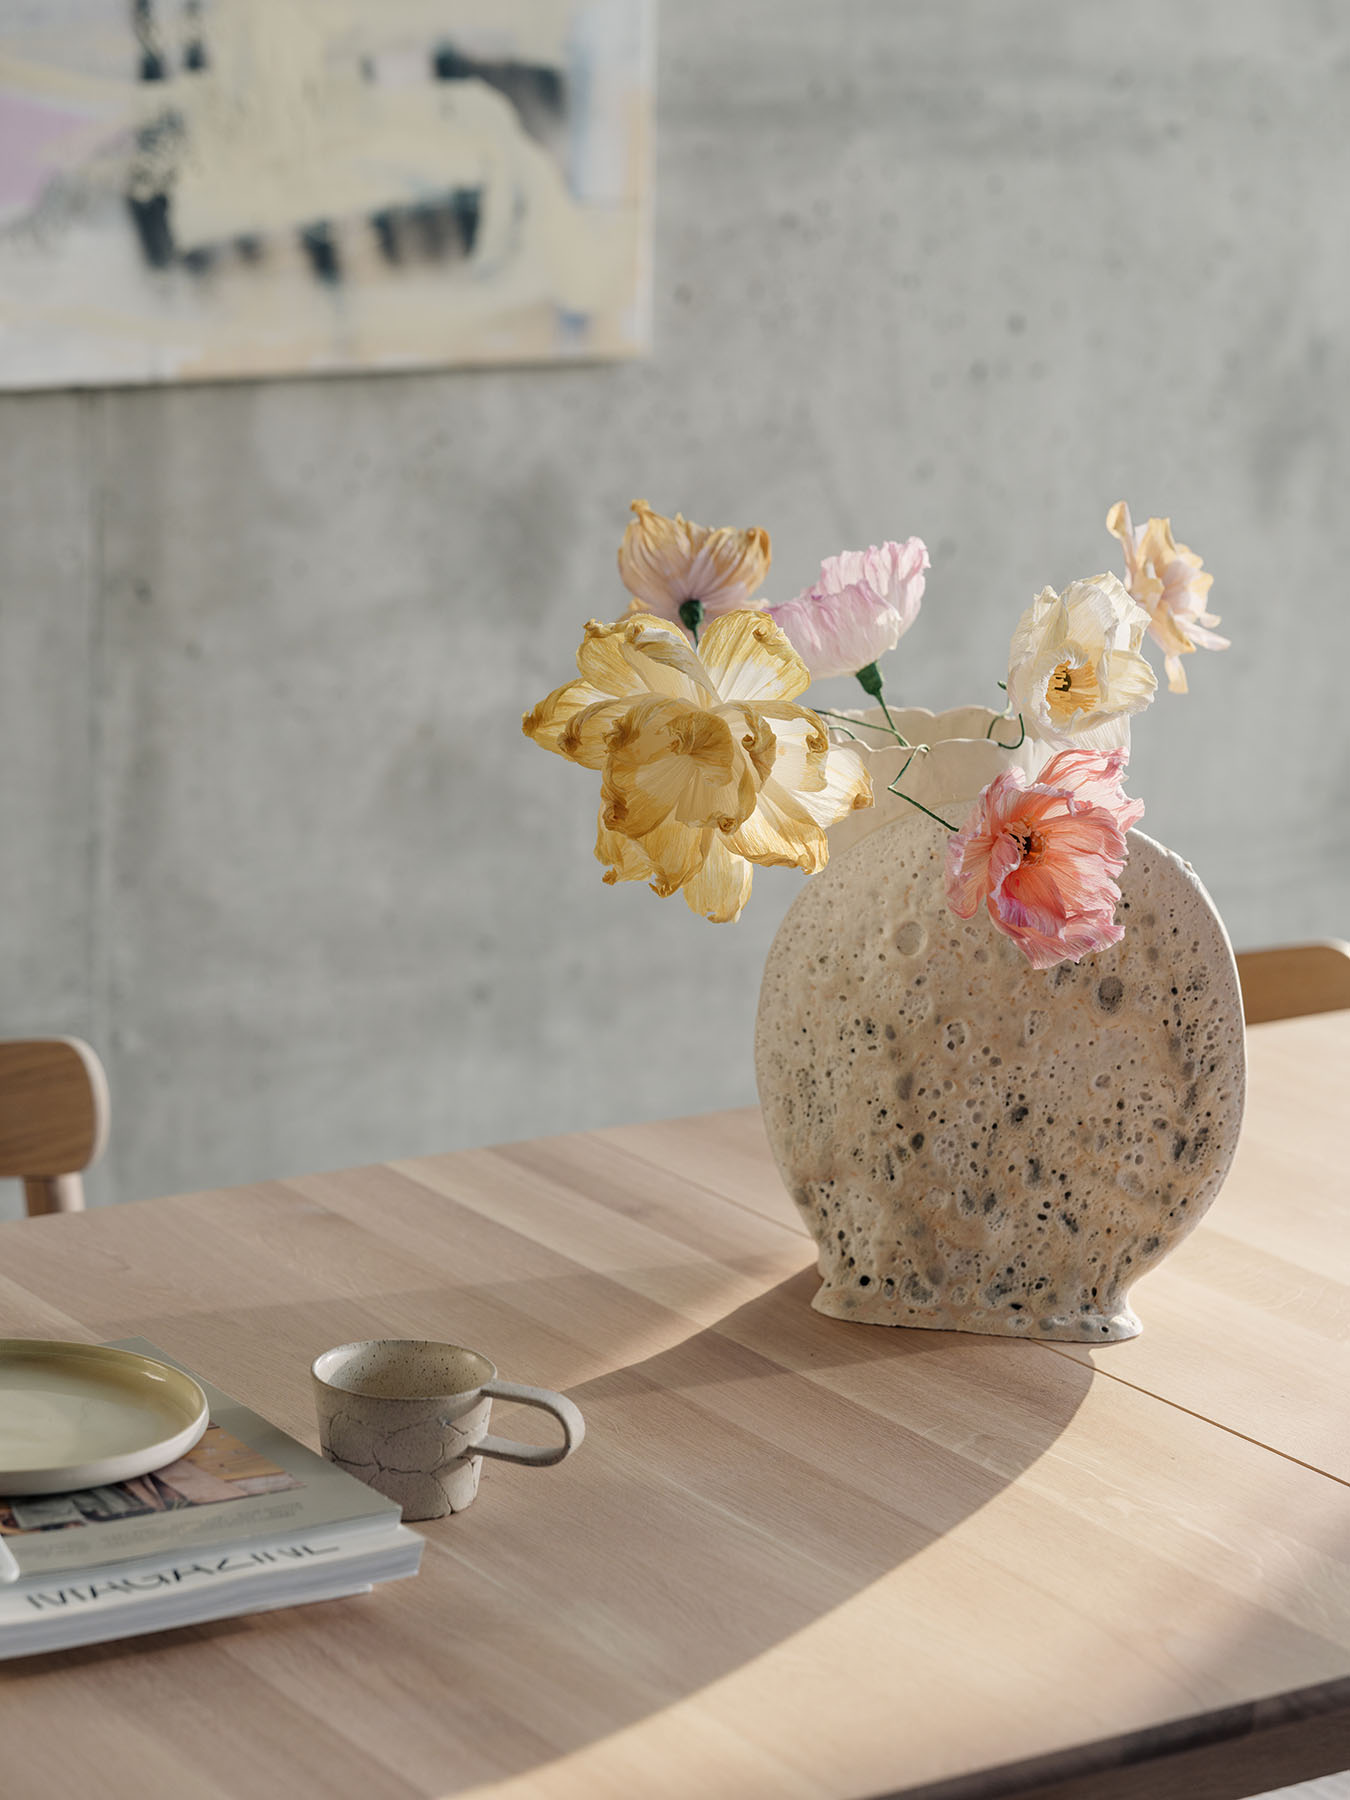 Expand_dining_table_light-oak_Detail_flowers_Northern_Ph_Einar_Aslaksen_Low-res